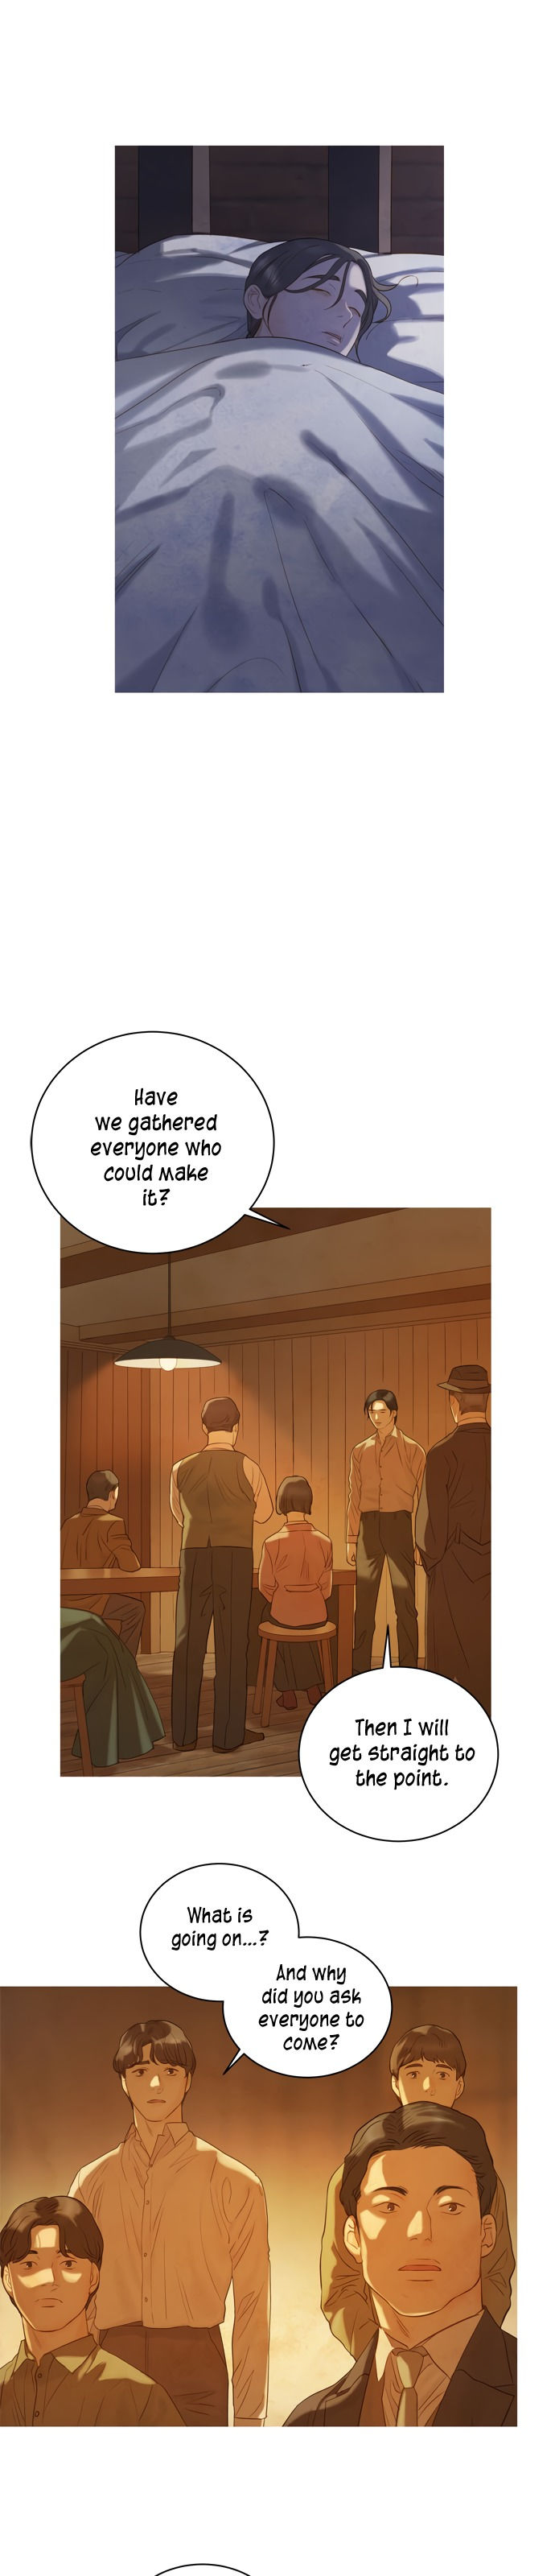 Gorae Byul - The Gyeongseong Mermaid - Chapter 18 Page 11